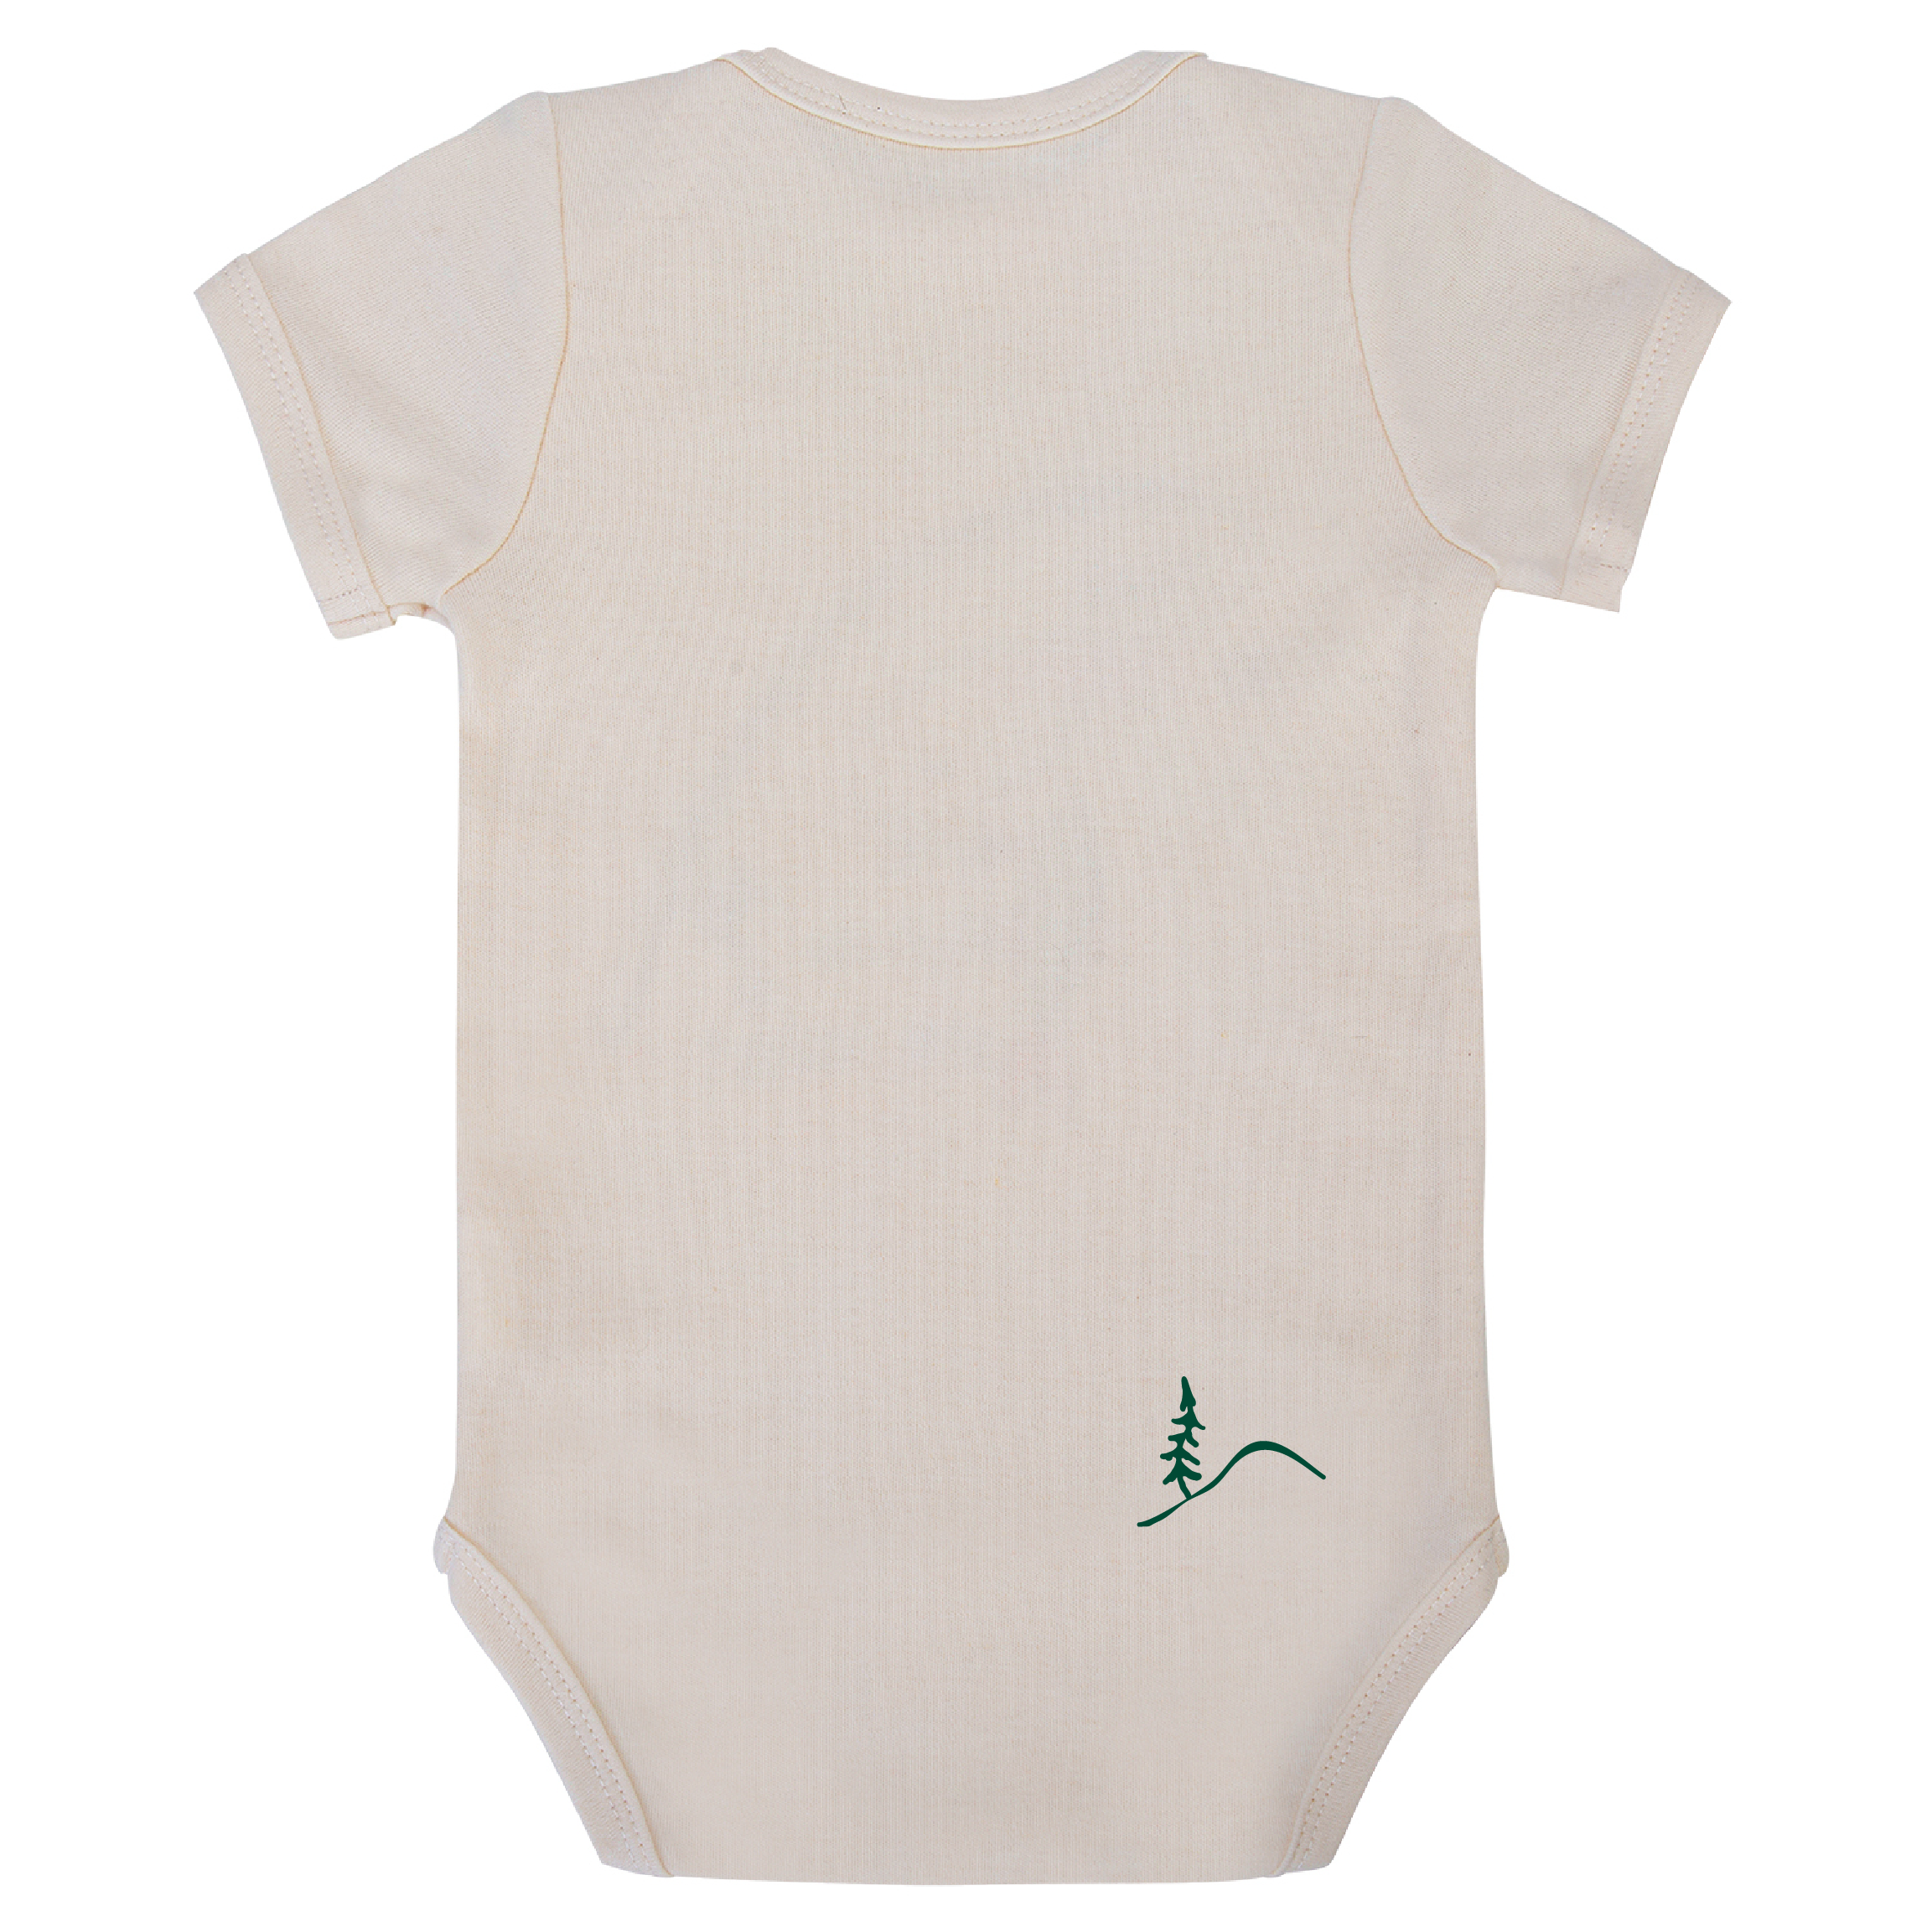 Baby It's Cold Outside Organic Onesie